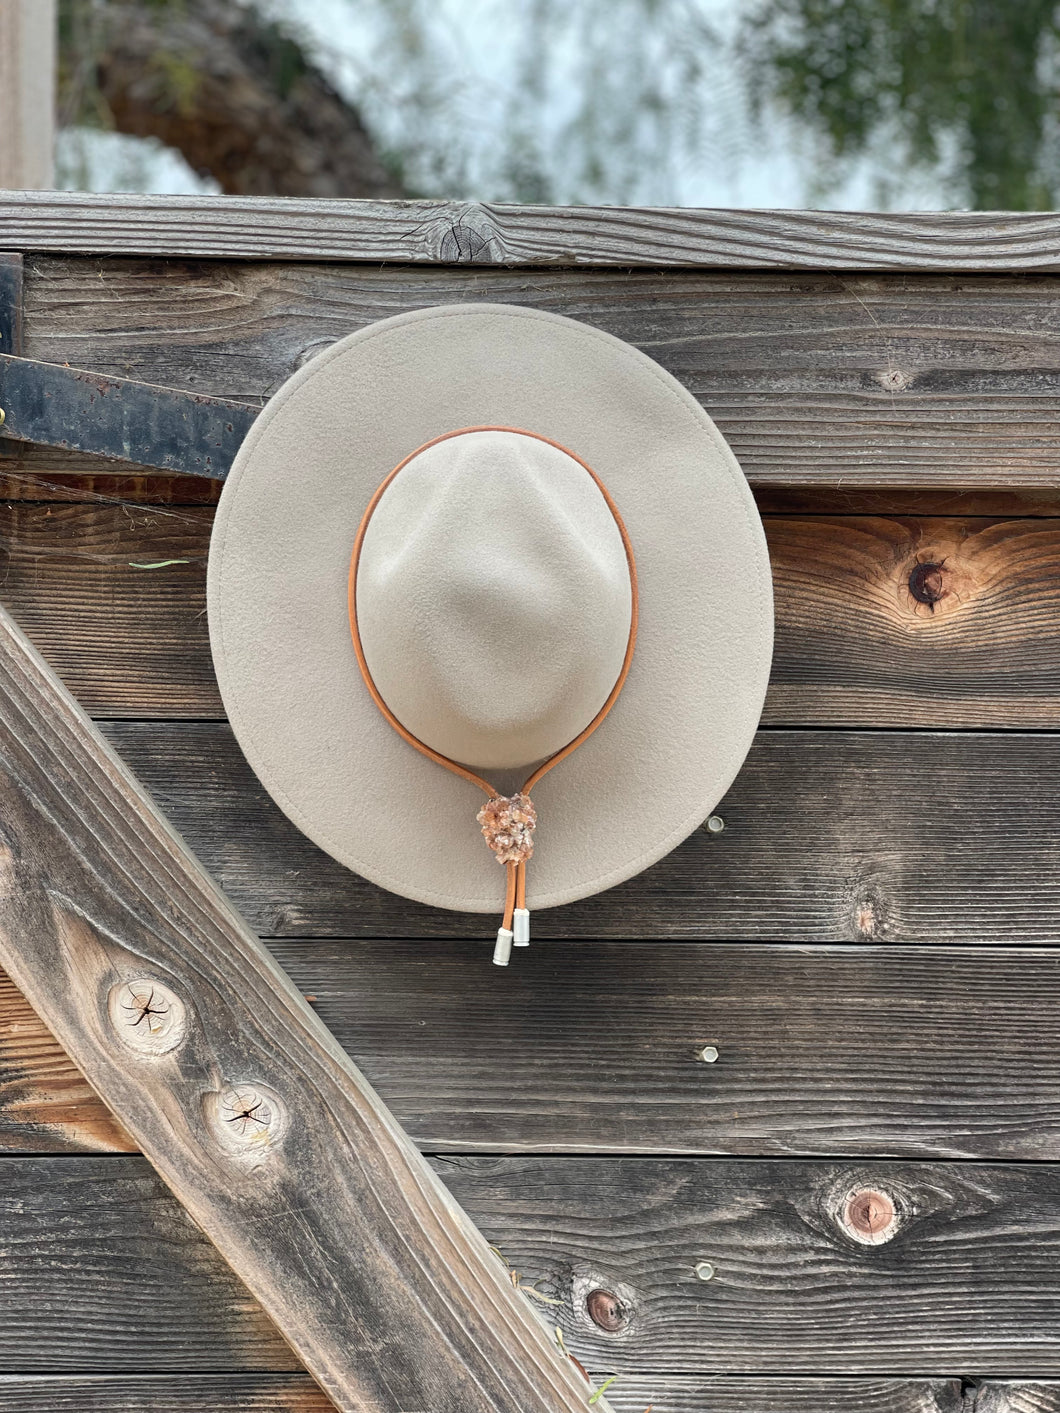 Adjustable hat band / Hat Bolo Tie